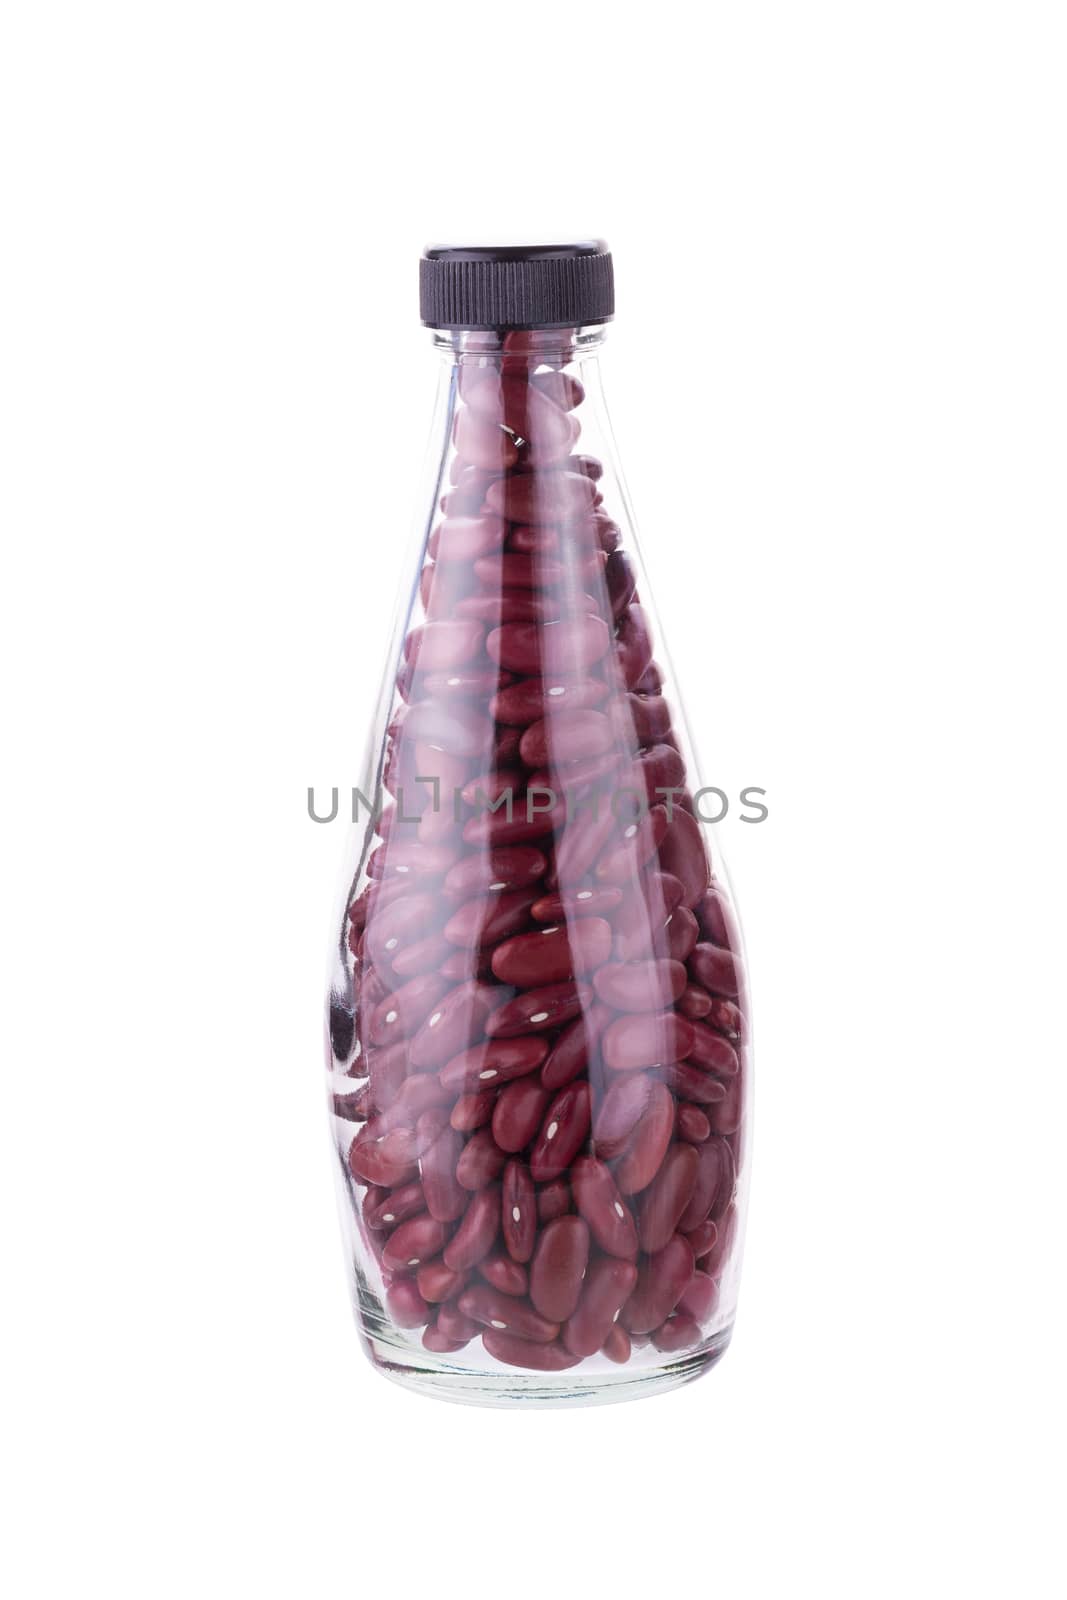 Red bean In a bottle isolated on a white background.